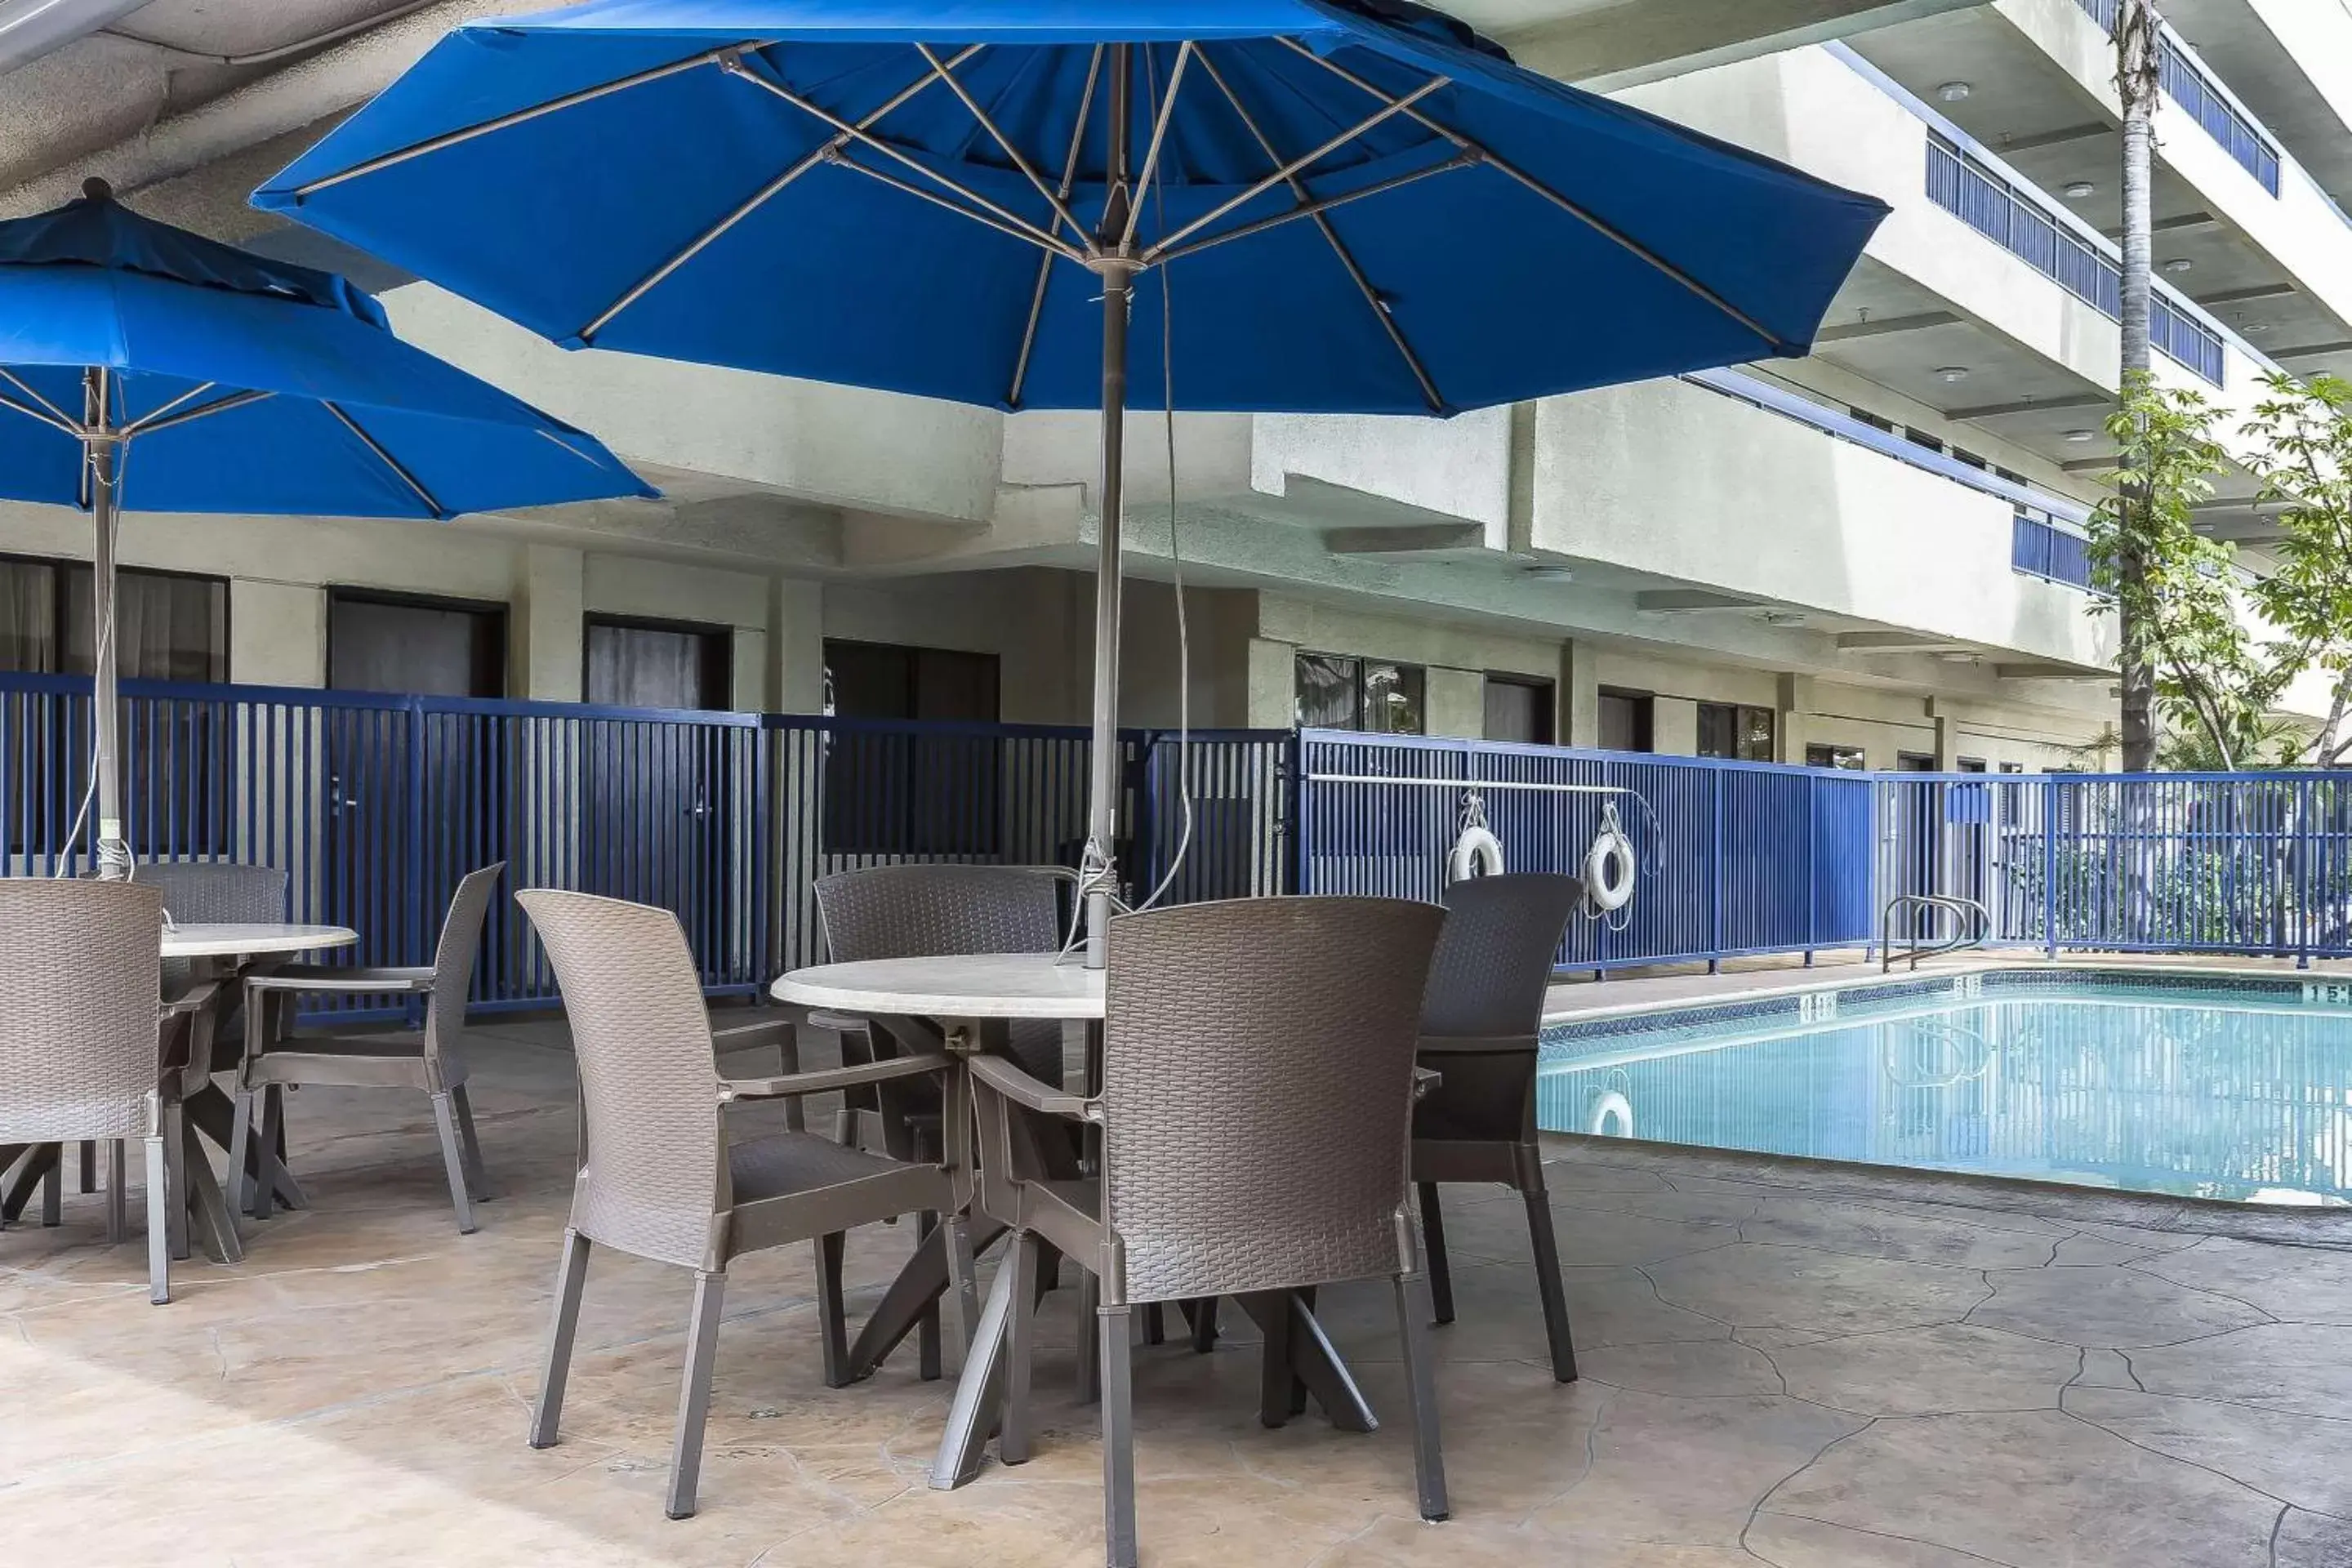 Swimming Pool in Quality Inn & Suites Los Angeles Airport - LAX